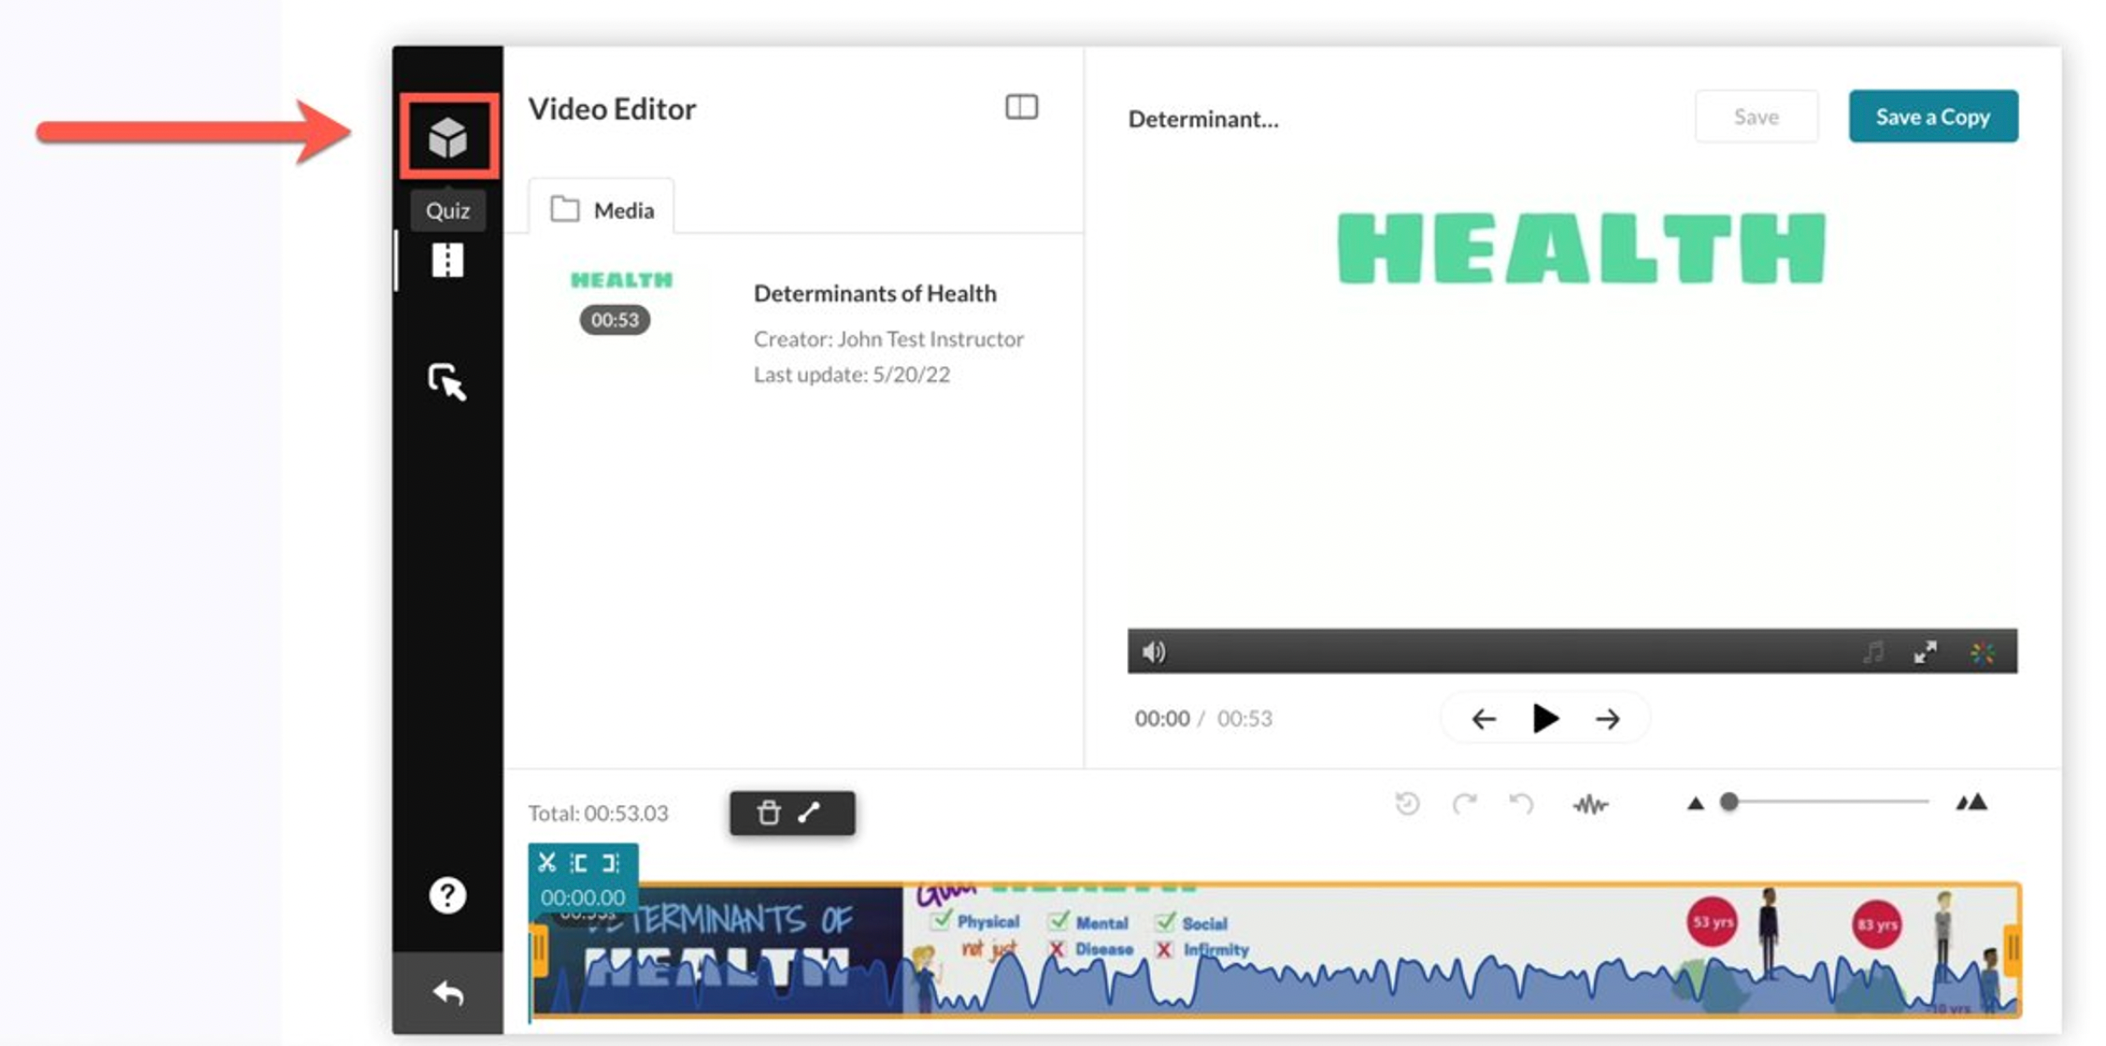 A Screenshot showing the Quiz Icon on th video editor page